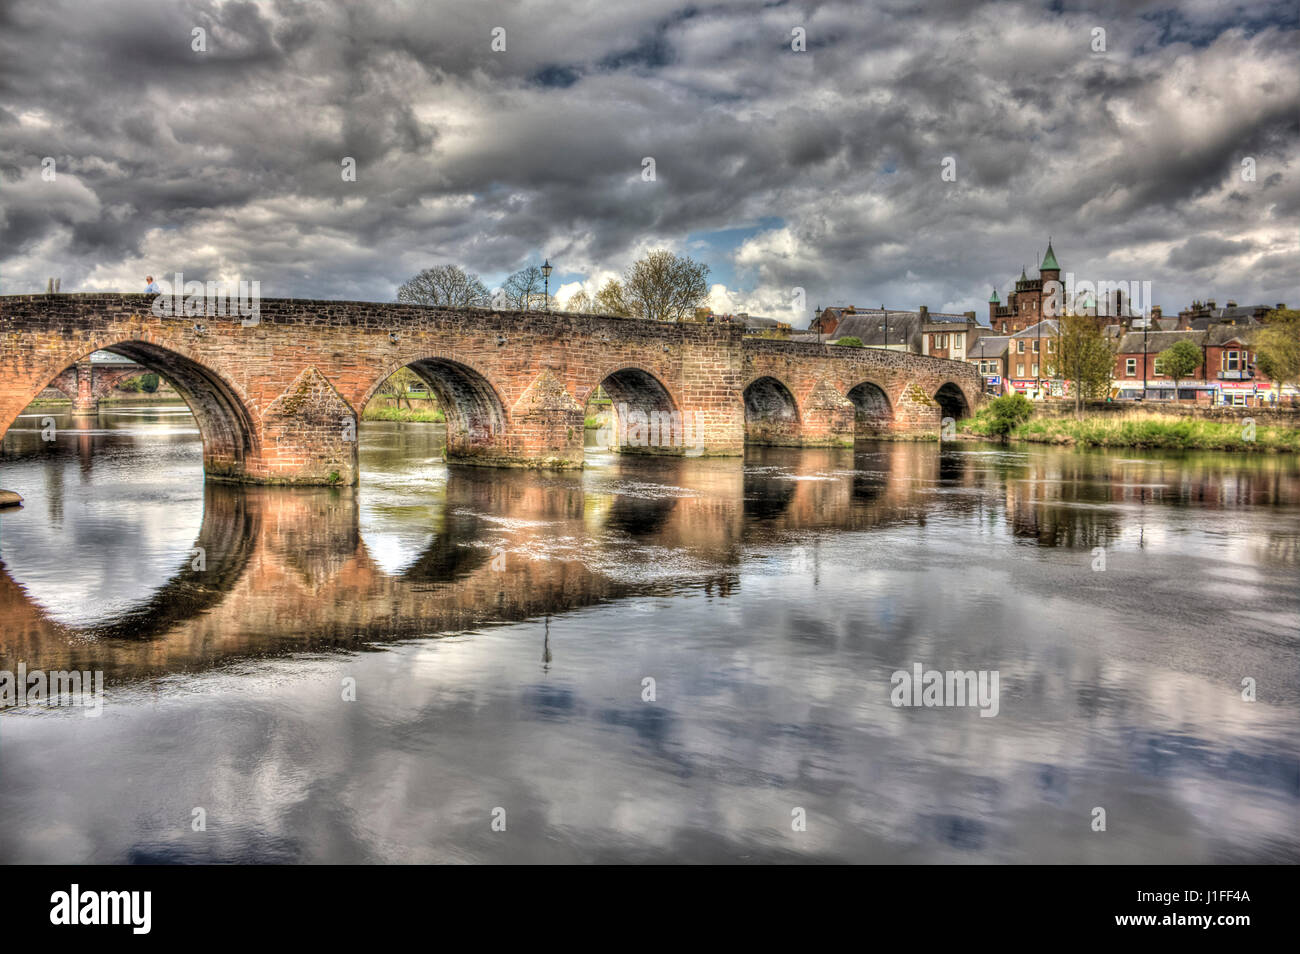 High Dynamic Range image of Devorgilla Bridge (Auld Brig) Dumfries, Scotland. The turrets of the Sherriff Court are visible in the background. Stock Photo